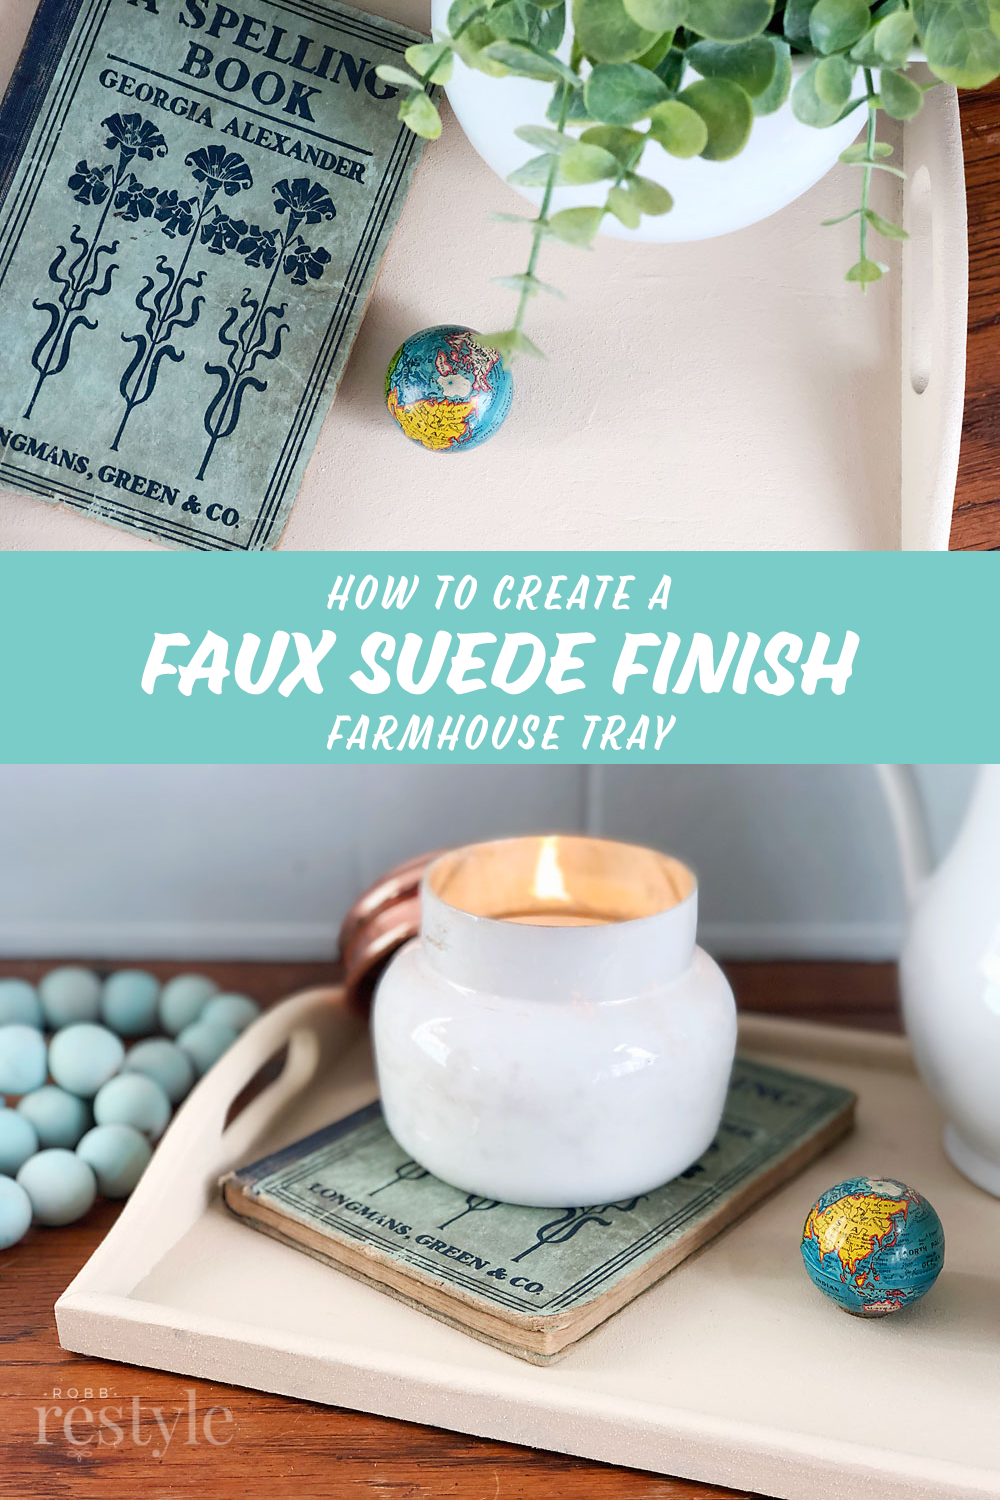 How to Faux Suede Finish Farmhouse Tray